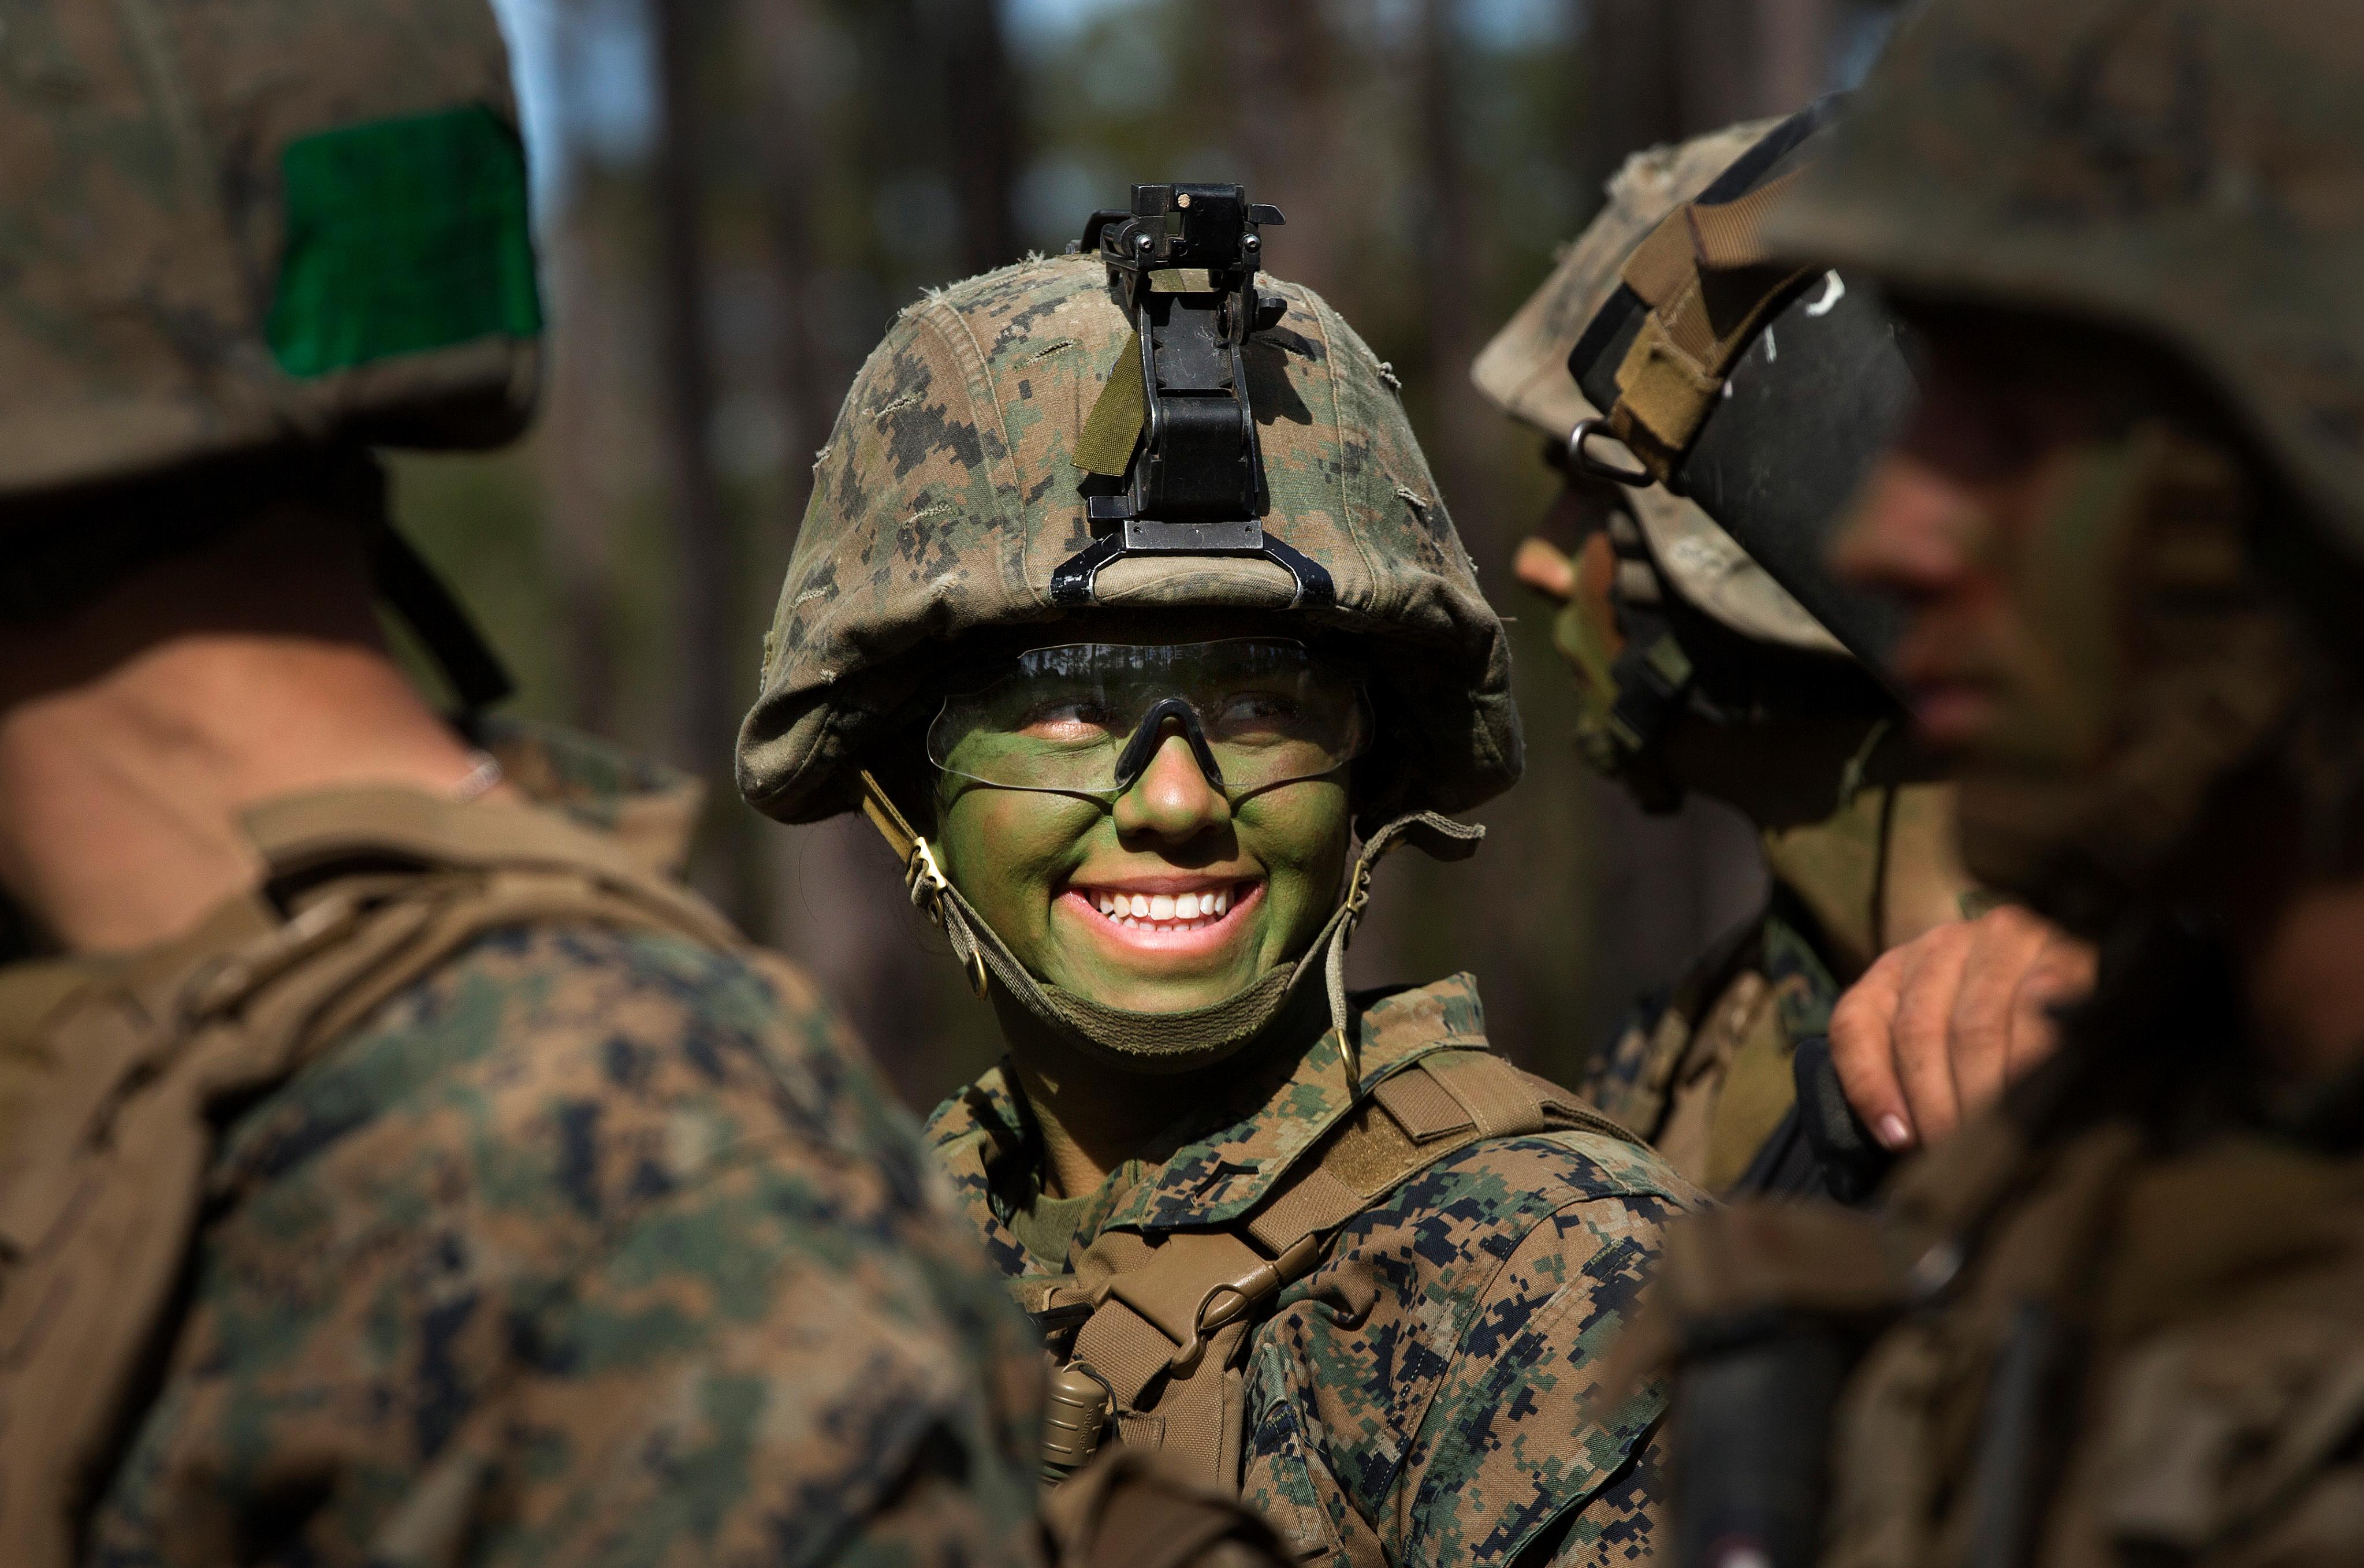 Pfc. Christina Fuentes Montenegro, of Coral Springs, Fla., and other Marines from Delta Company, Infantry Training Battalion, School of Infantry-East, receive final instructions prior to assaulting an objective during the Infantry Integrated Field Training Exercise aboard Camp Geiger, N.C., Nov 15, 2013.